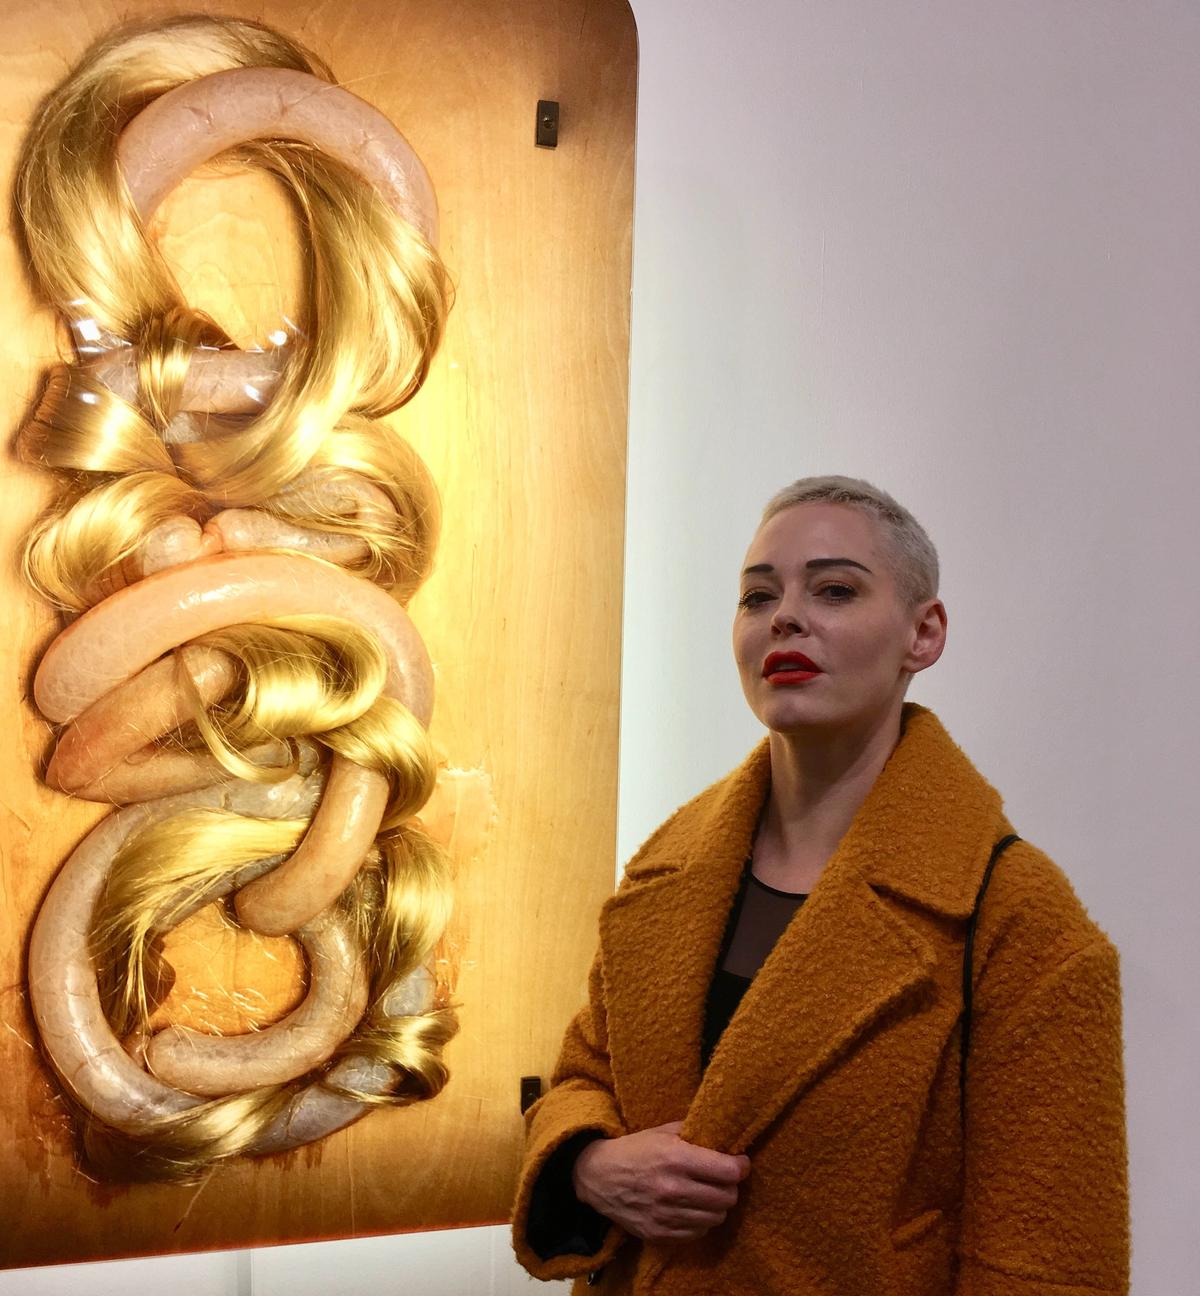 Rose McGowan, the actress and pioneer of the #metoo movement, visited the Social Work section at Frieze London yesterday on the first anniversary of #MeToo. She described the section as: "incredibly powerful, moving and profound." Adding: "To see this display in such a beautiful way means the world to me especially in the world that we are now living in." © Louisa Buck